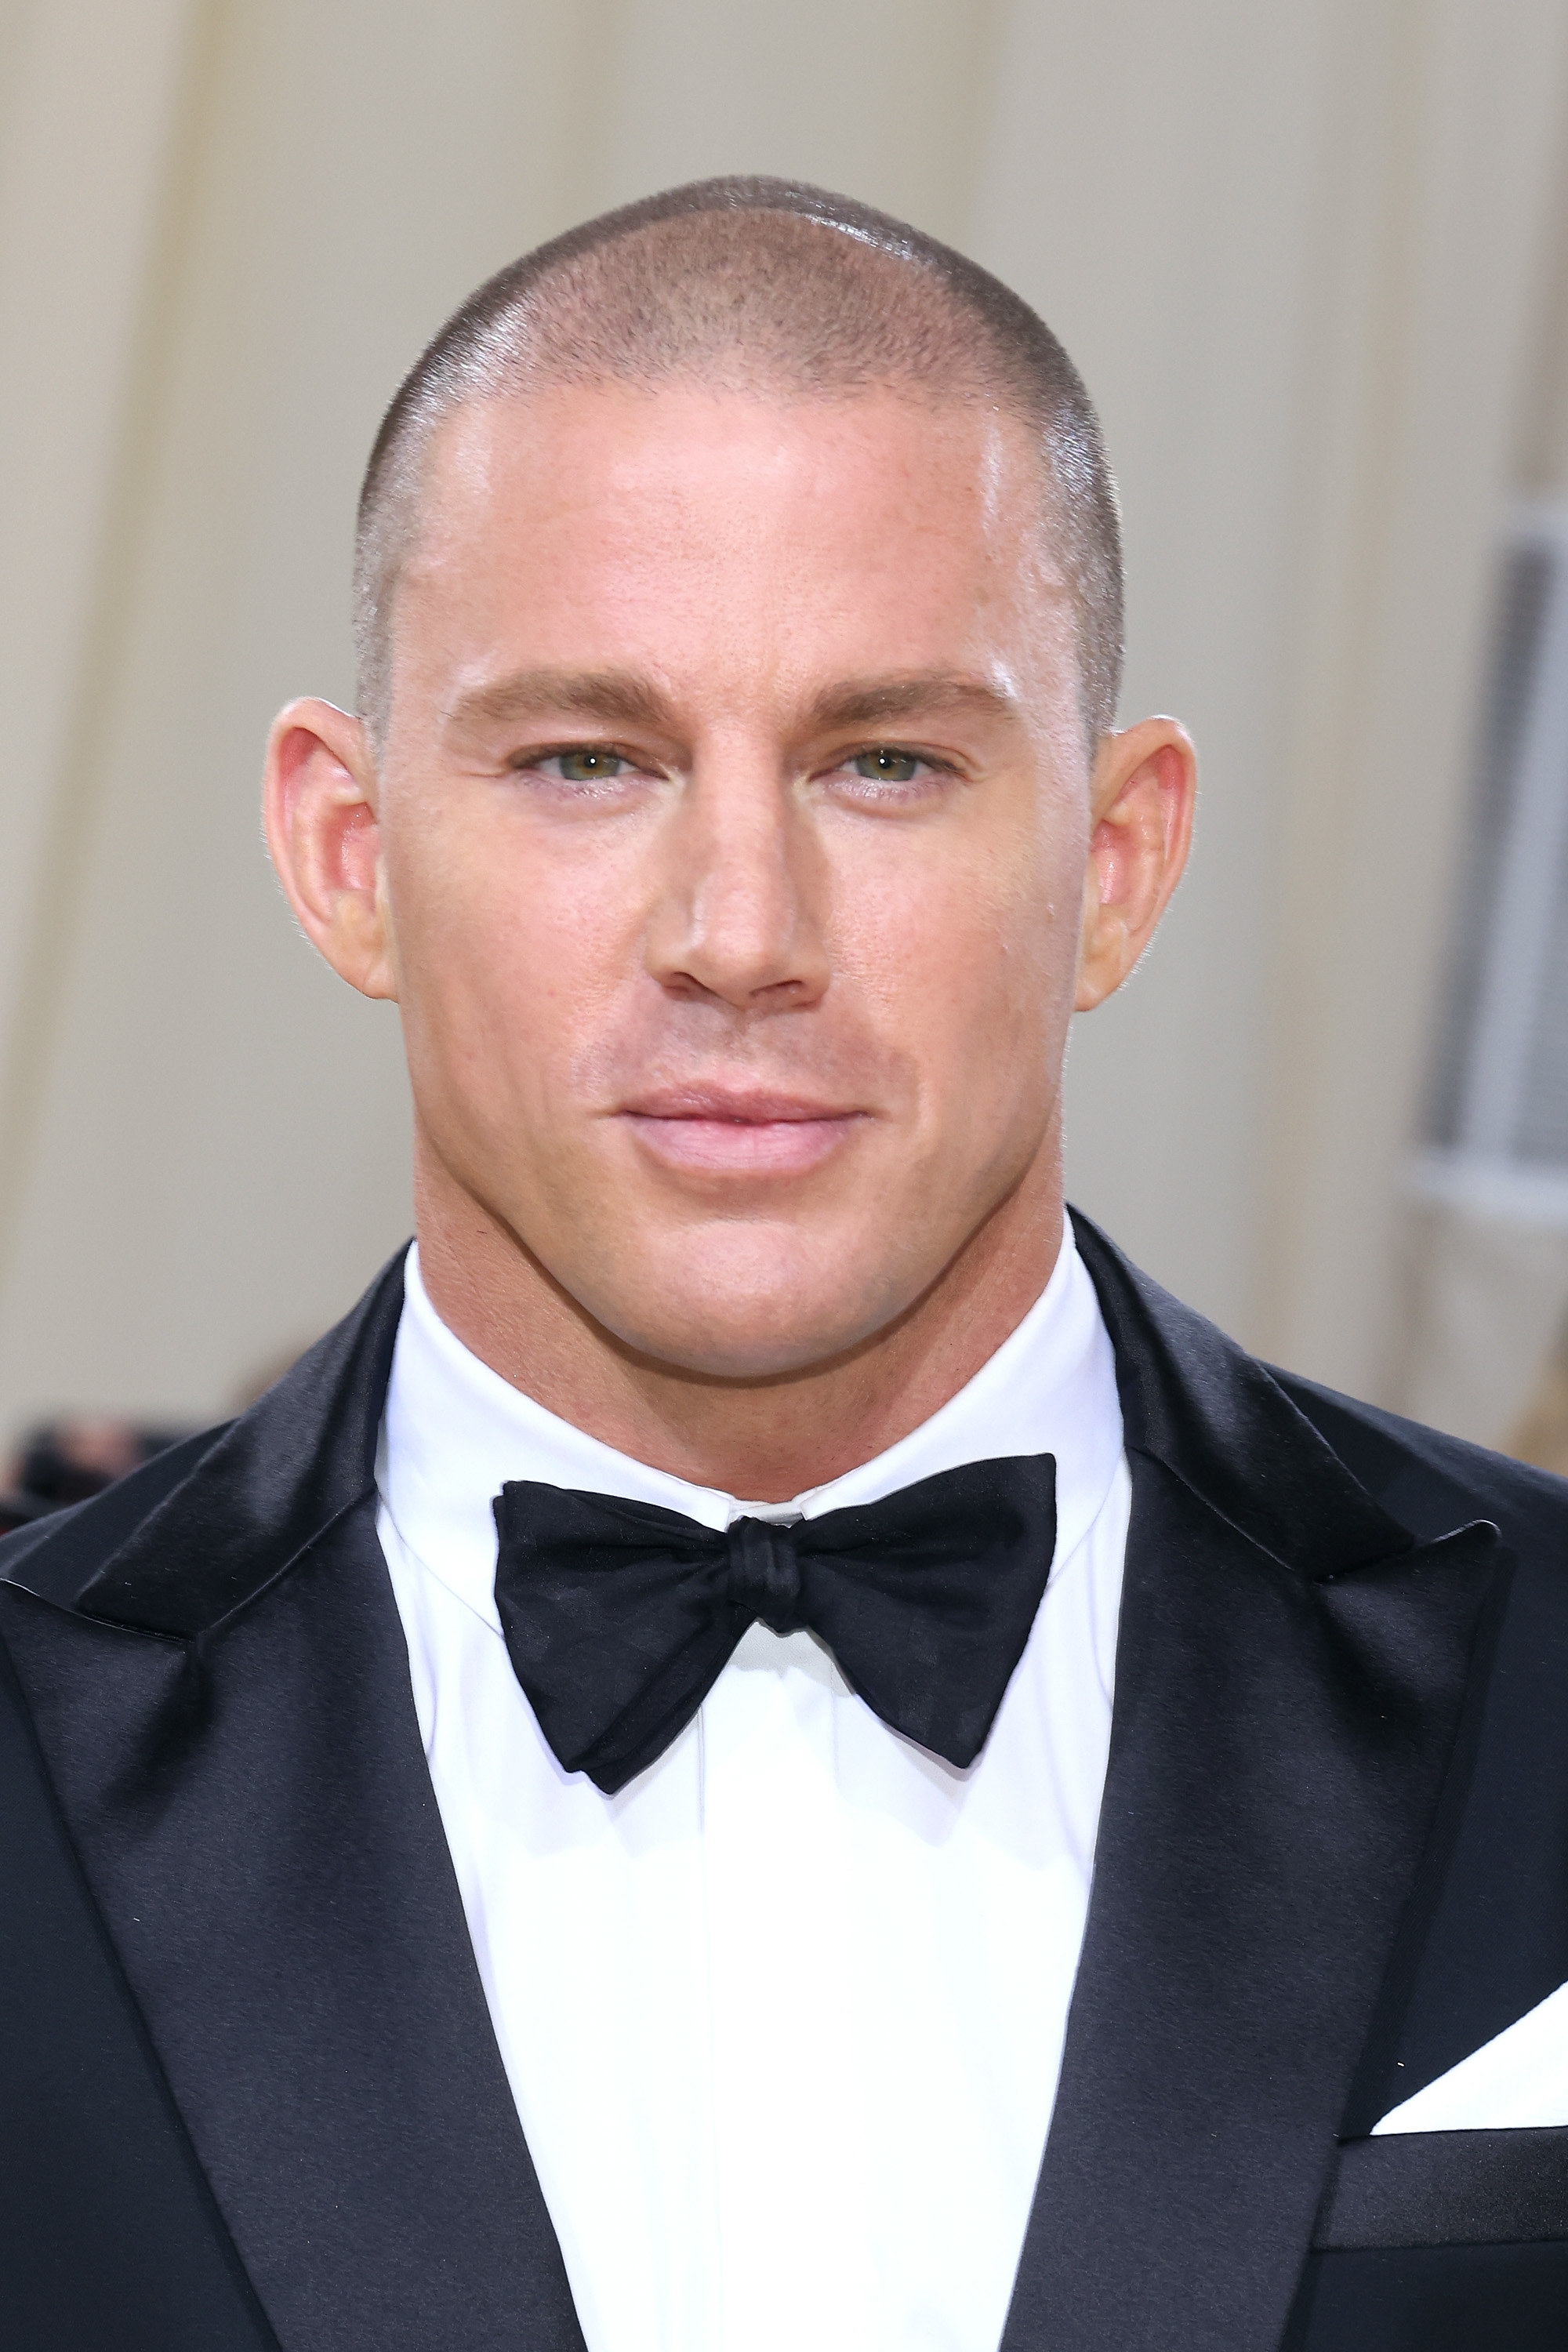 Channing in a suit at a red carpet event